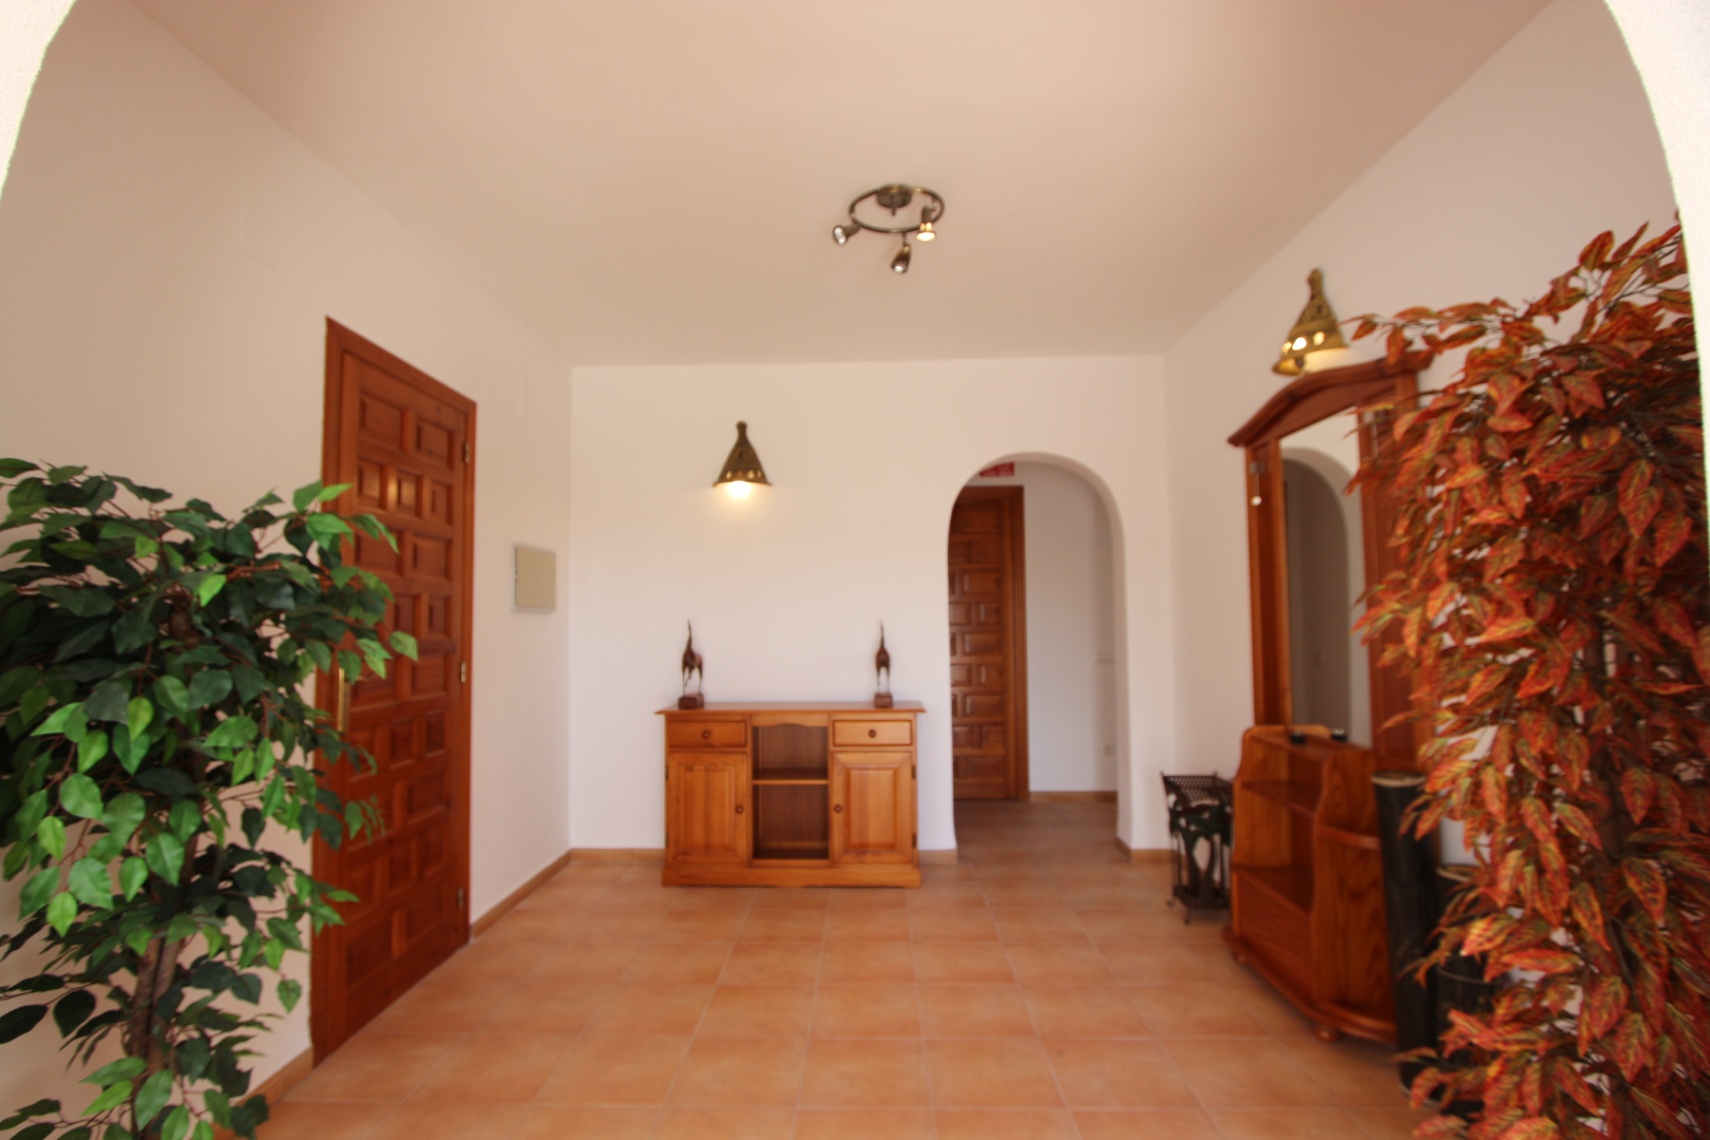 CHARMING 4-BEDROOM MEDITERRANEAN VILLA FOR SALE ON THE PICTURESQUE COAST OF BENISSA